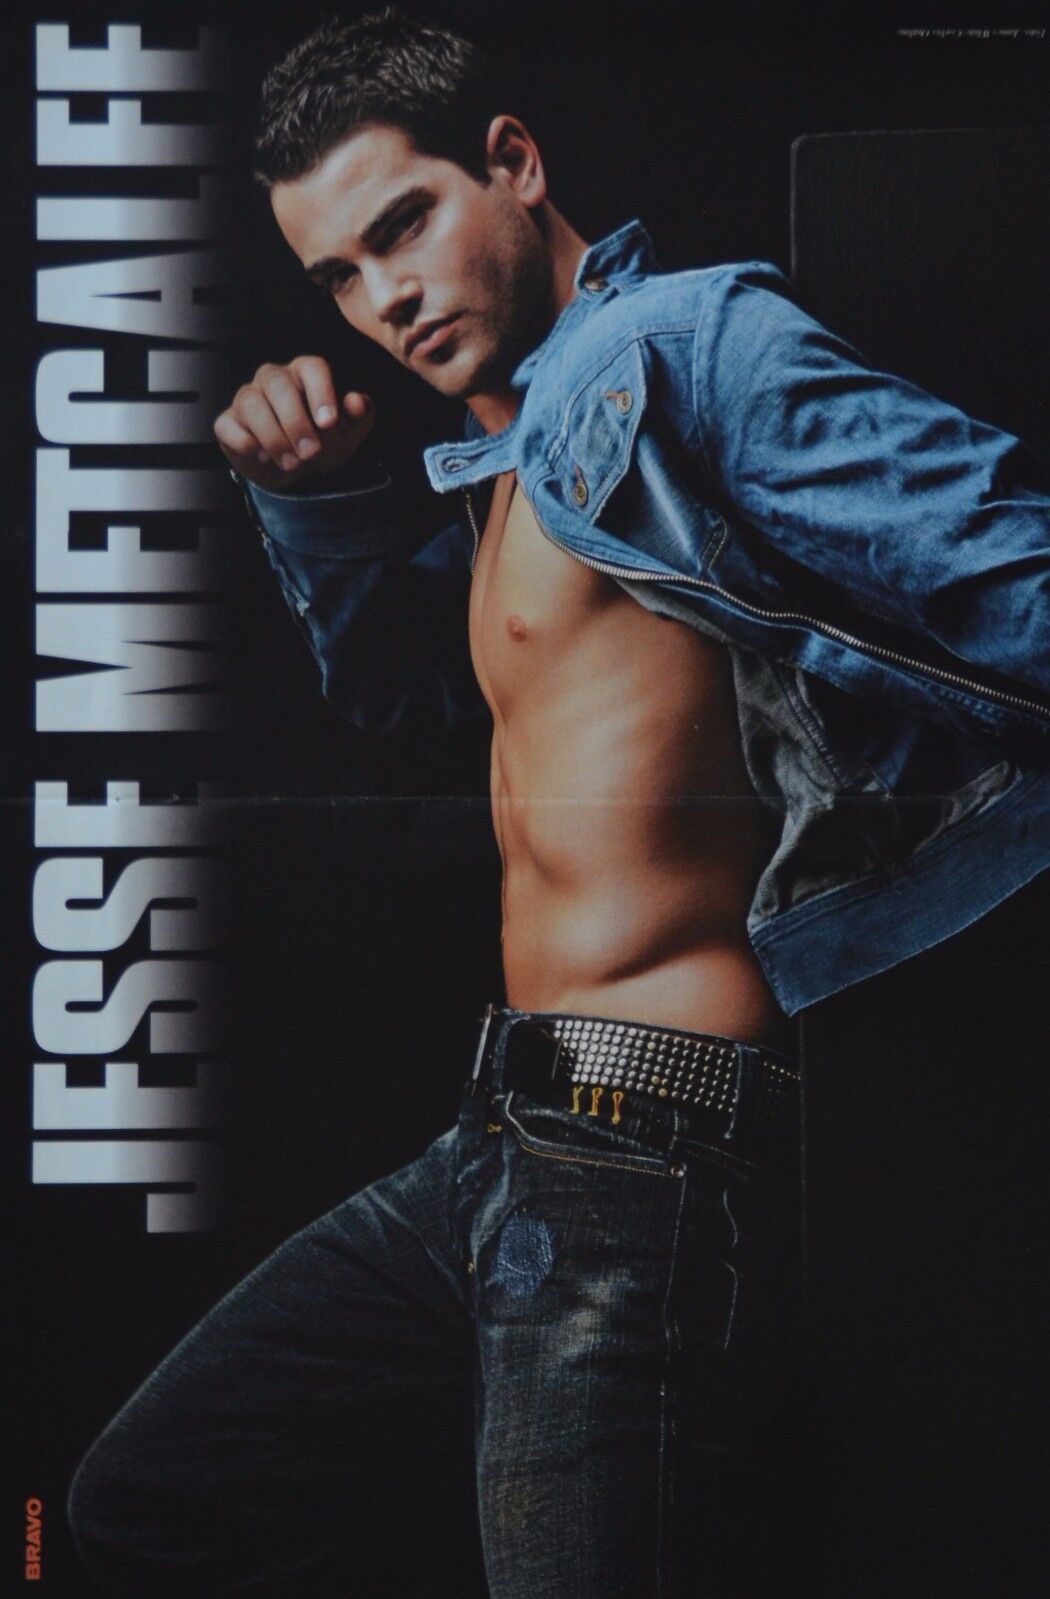 Jesse Metcalfe-A3 Poster (approx 42 x 28 cm) - clippings Fan Col